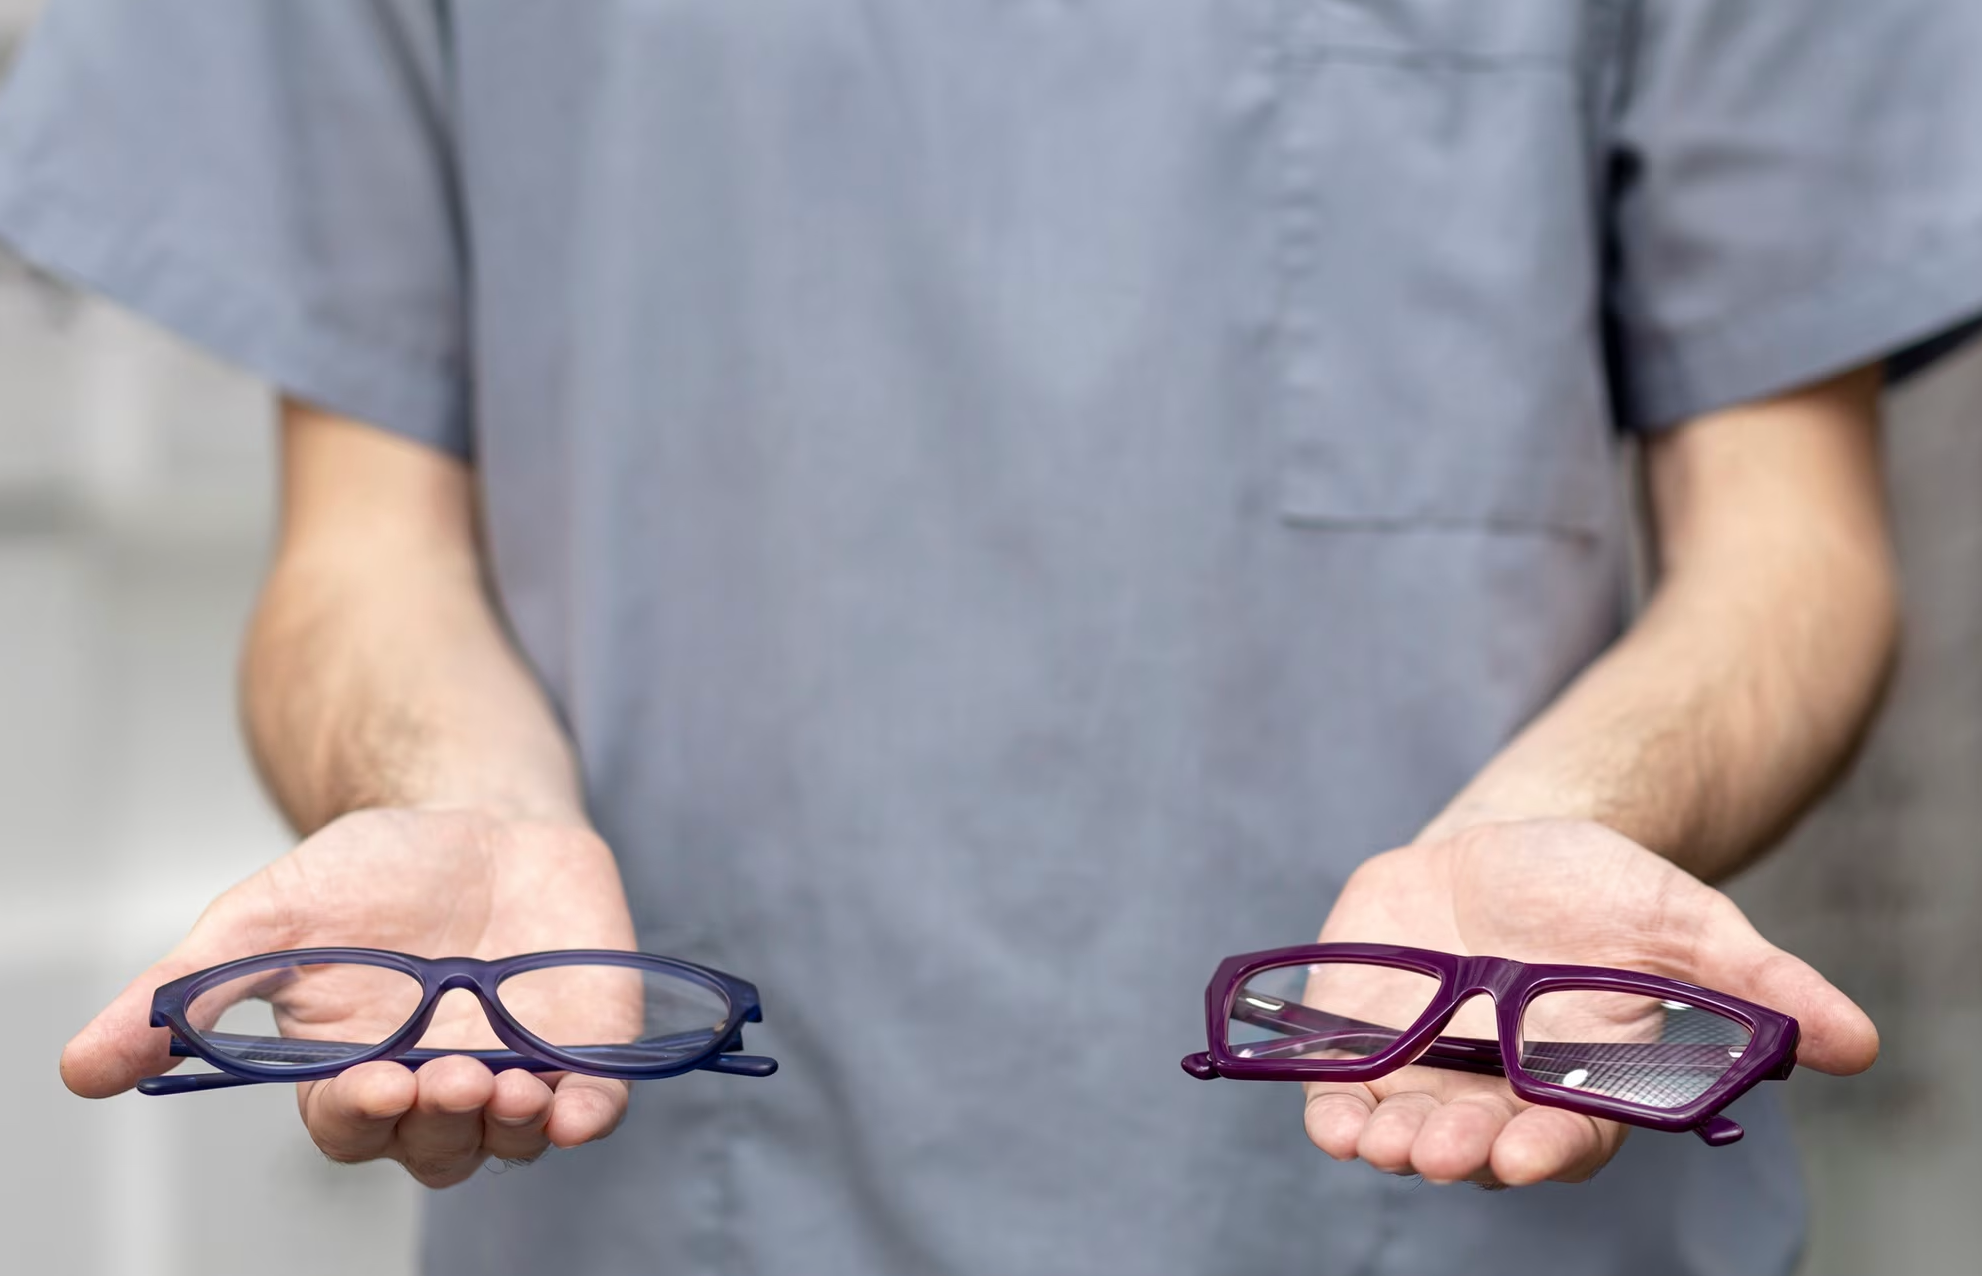 The Ultimate Guide: Rimless Eyeglasses vs. Semi-Rimless - Which Is Right for You?